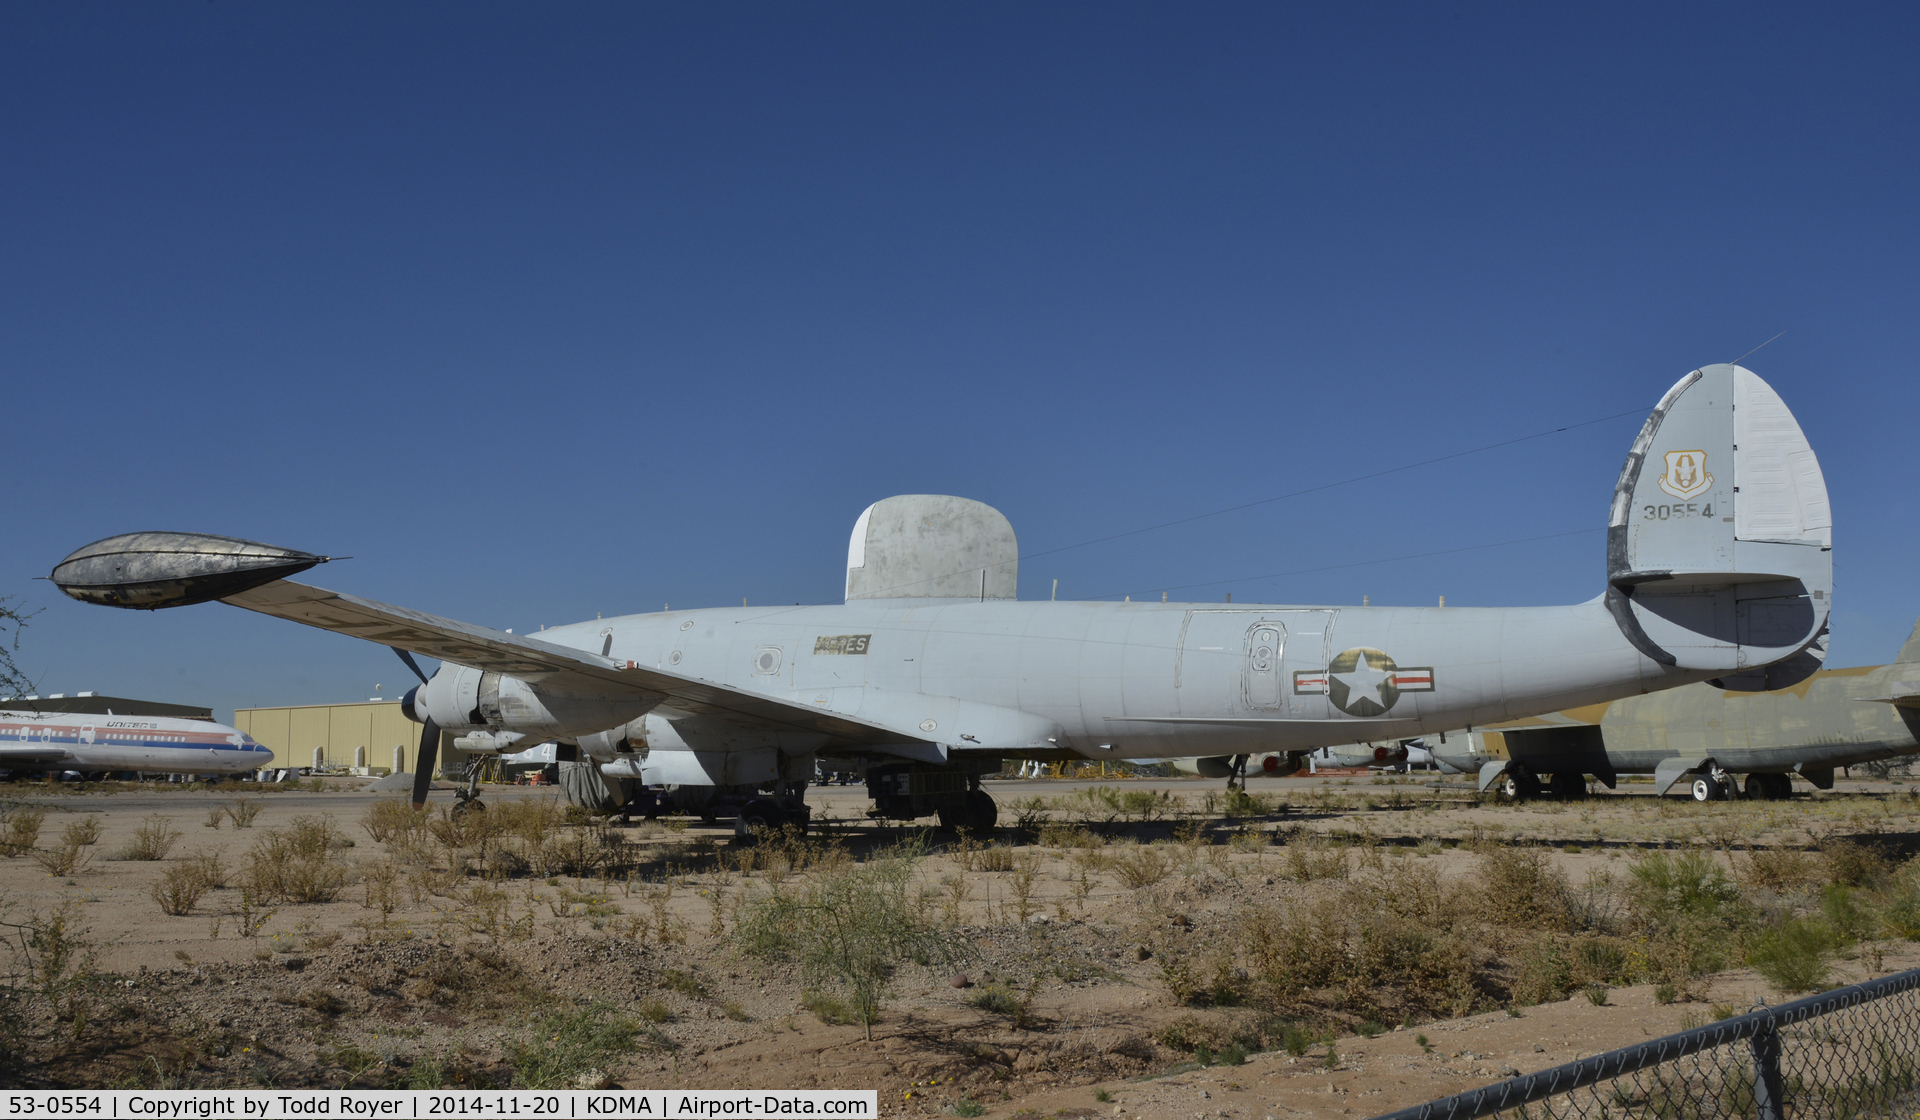 53-0554, 1953 Lockheed EC-121T Warning Star C/N 1049A-4369, In storage at the Pima Air and Space Museum